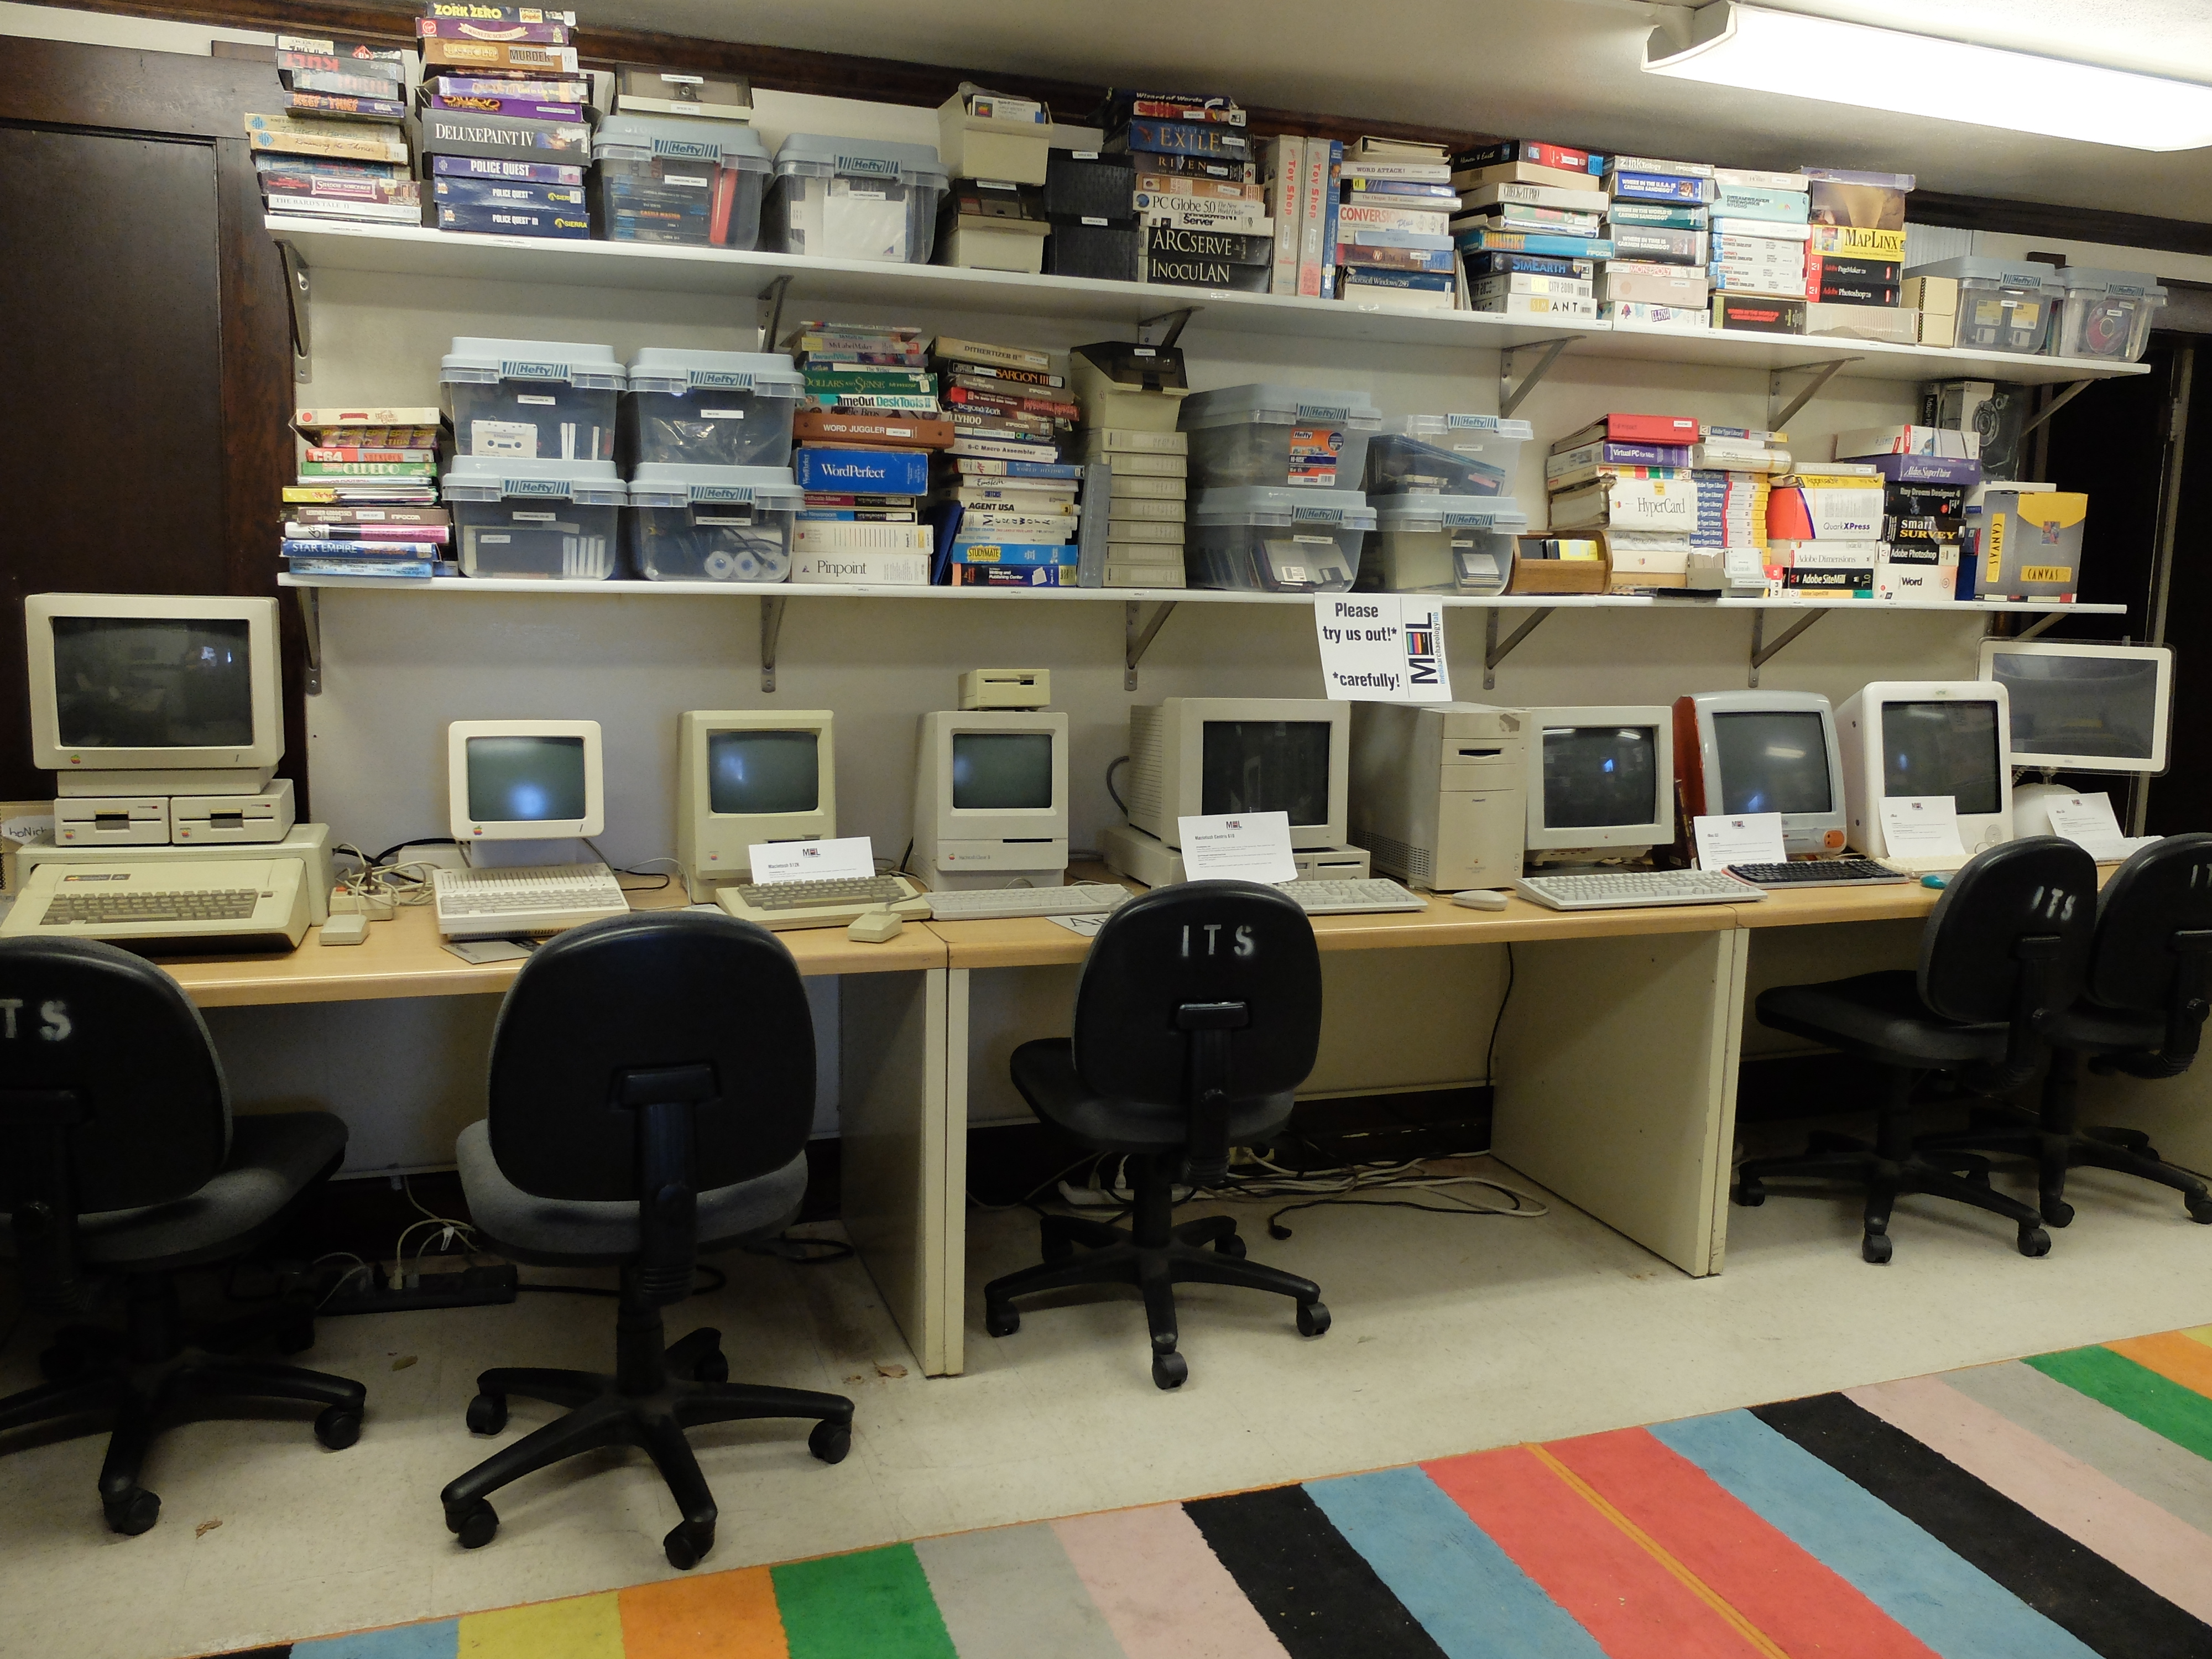 Several historic personal computers lined up on desks with a sign saying "Please try us out, carefully!"